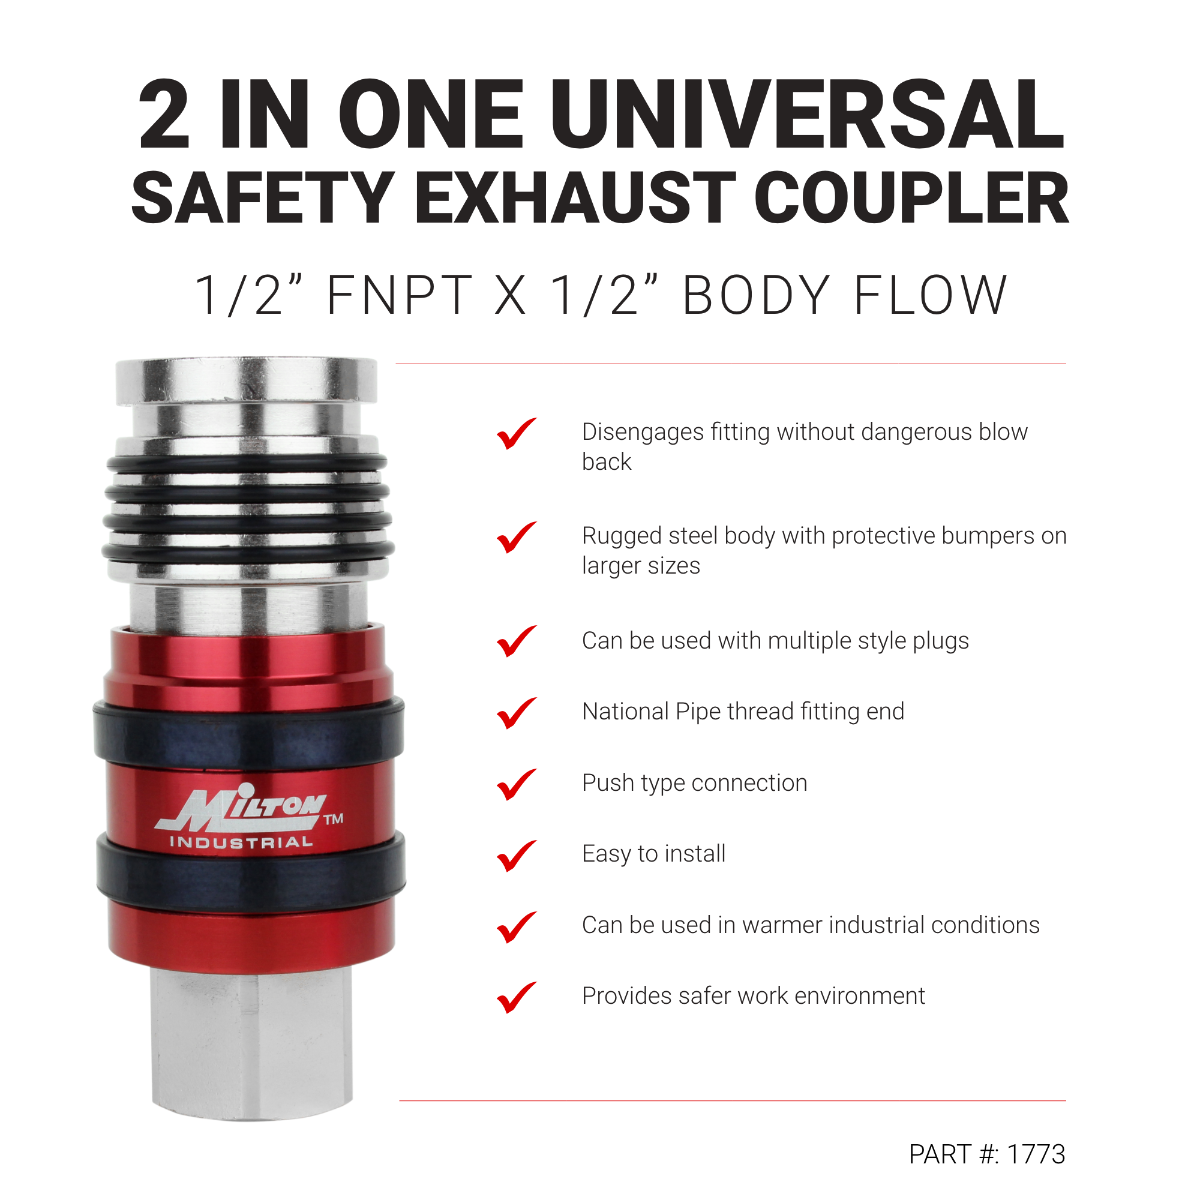 2-in-One Universal Safety Exhaust Industrial Coupler “ 1/2